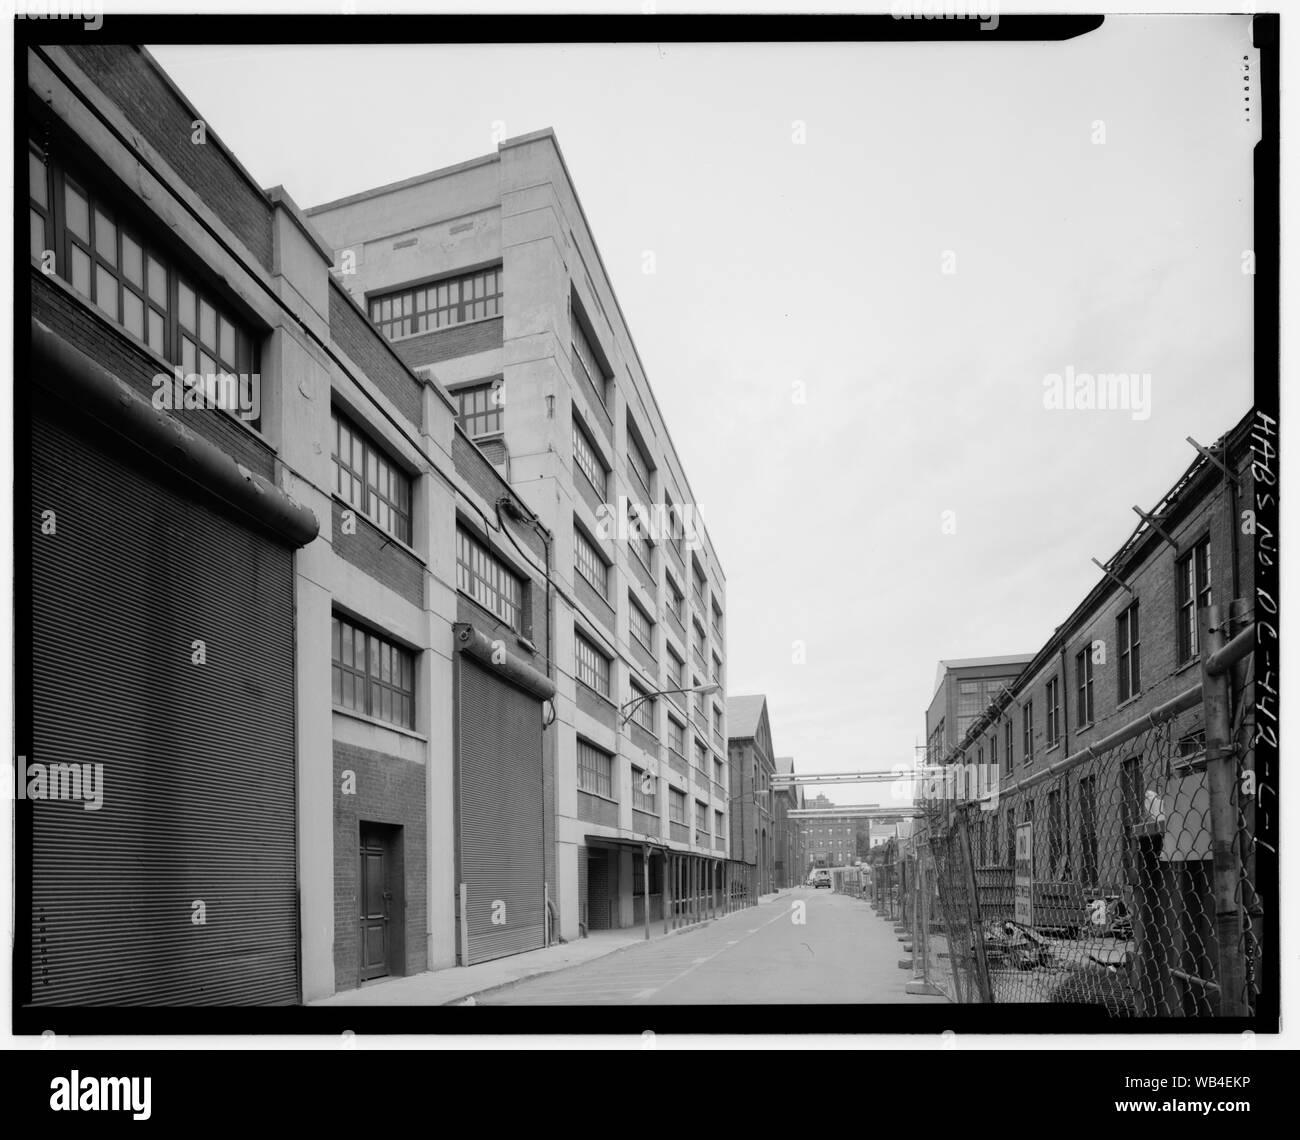 East and North Elevations, looking southwest - Navy Yard, Building No. 143; East and North Elevations, looking southwest - Navy Yard, Building No. 143, Between Isaac Hull & Patterson Avenues, Washington, District of Columbia, DC Stock Photo